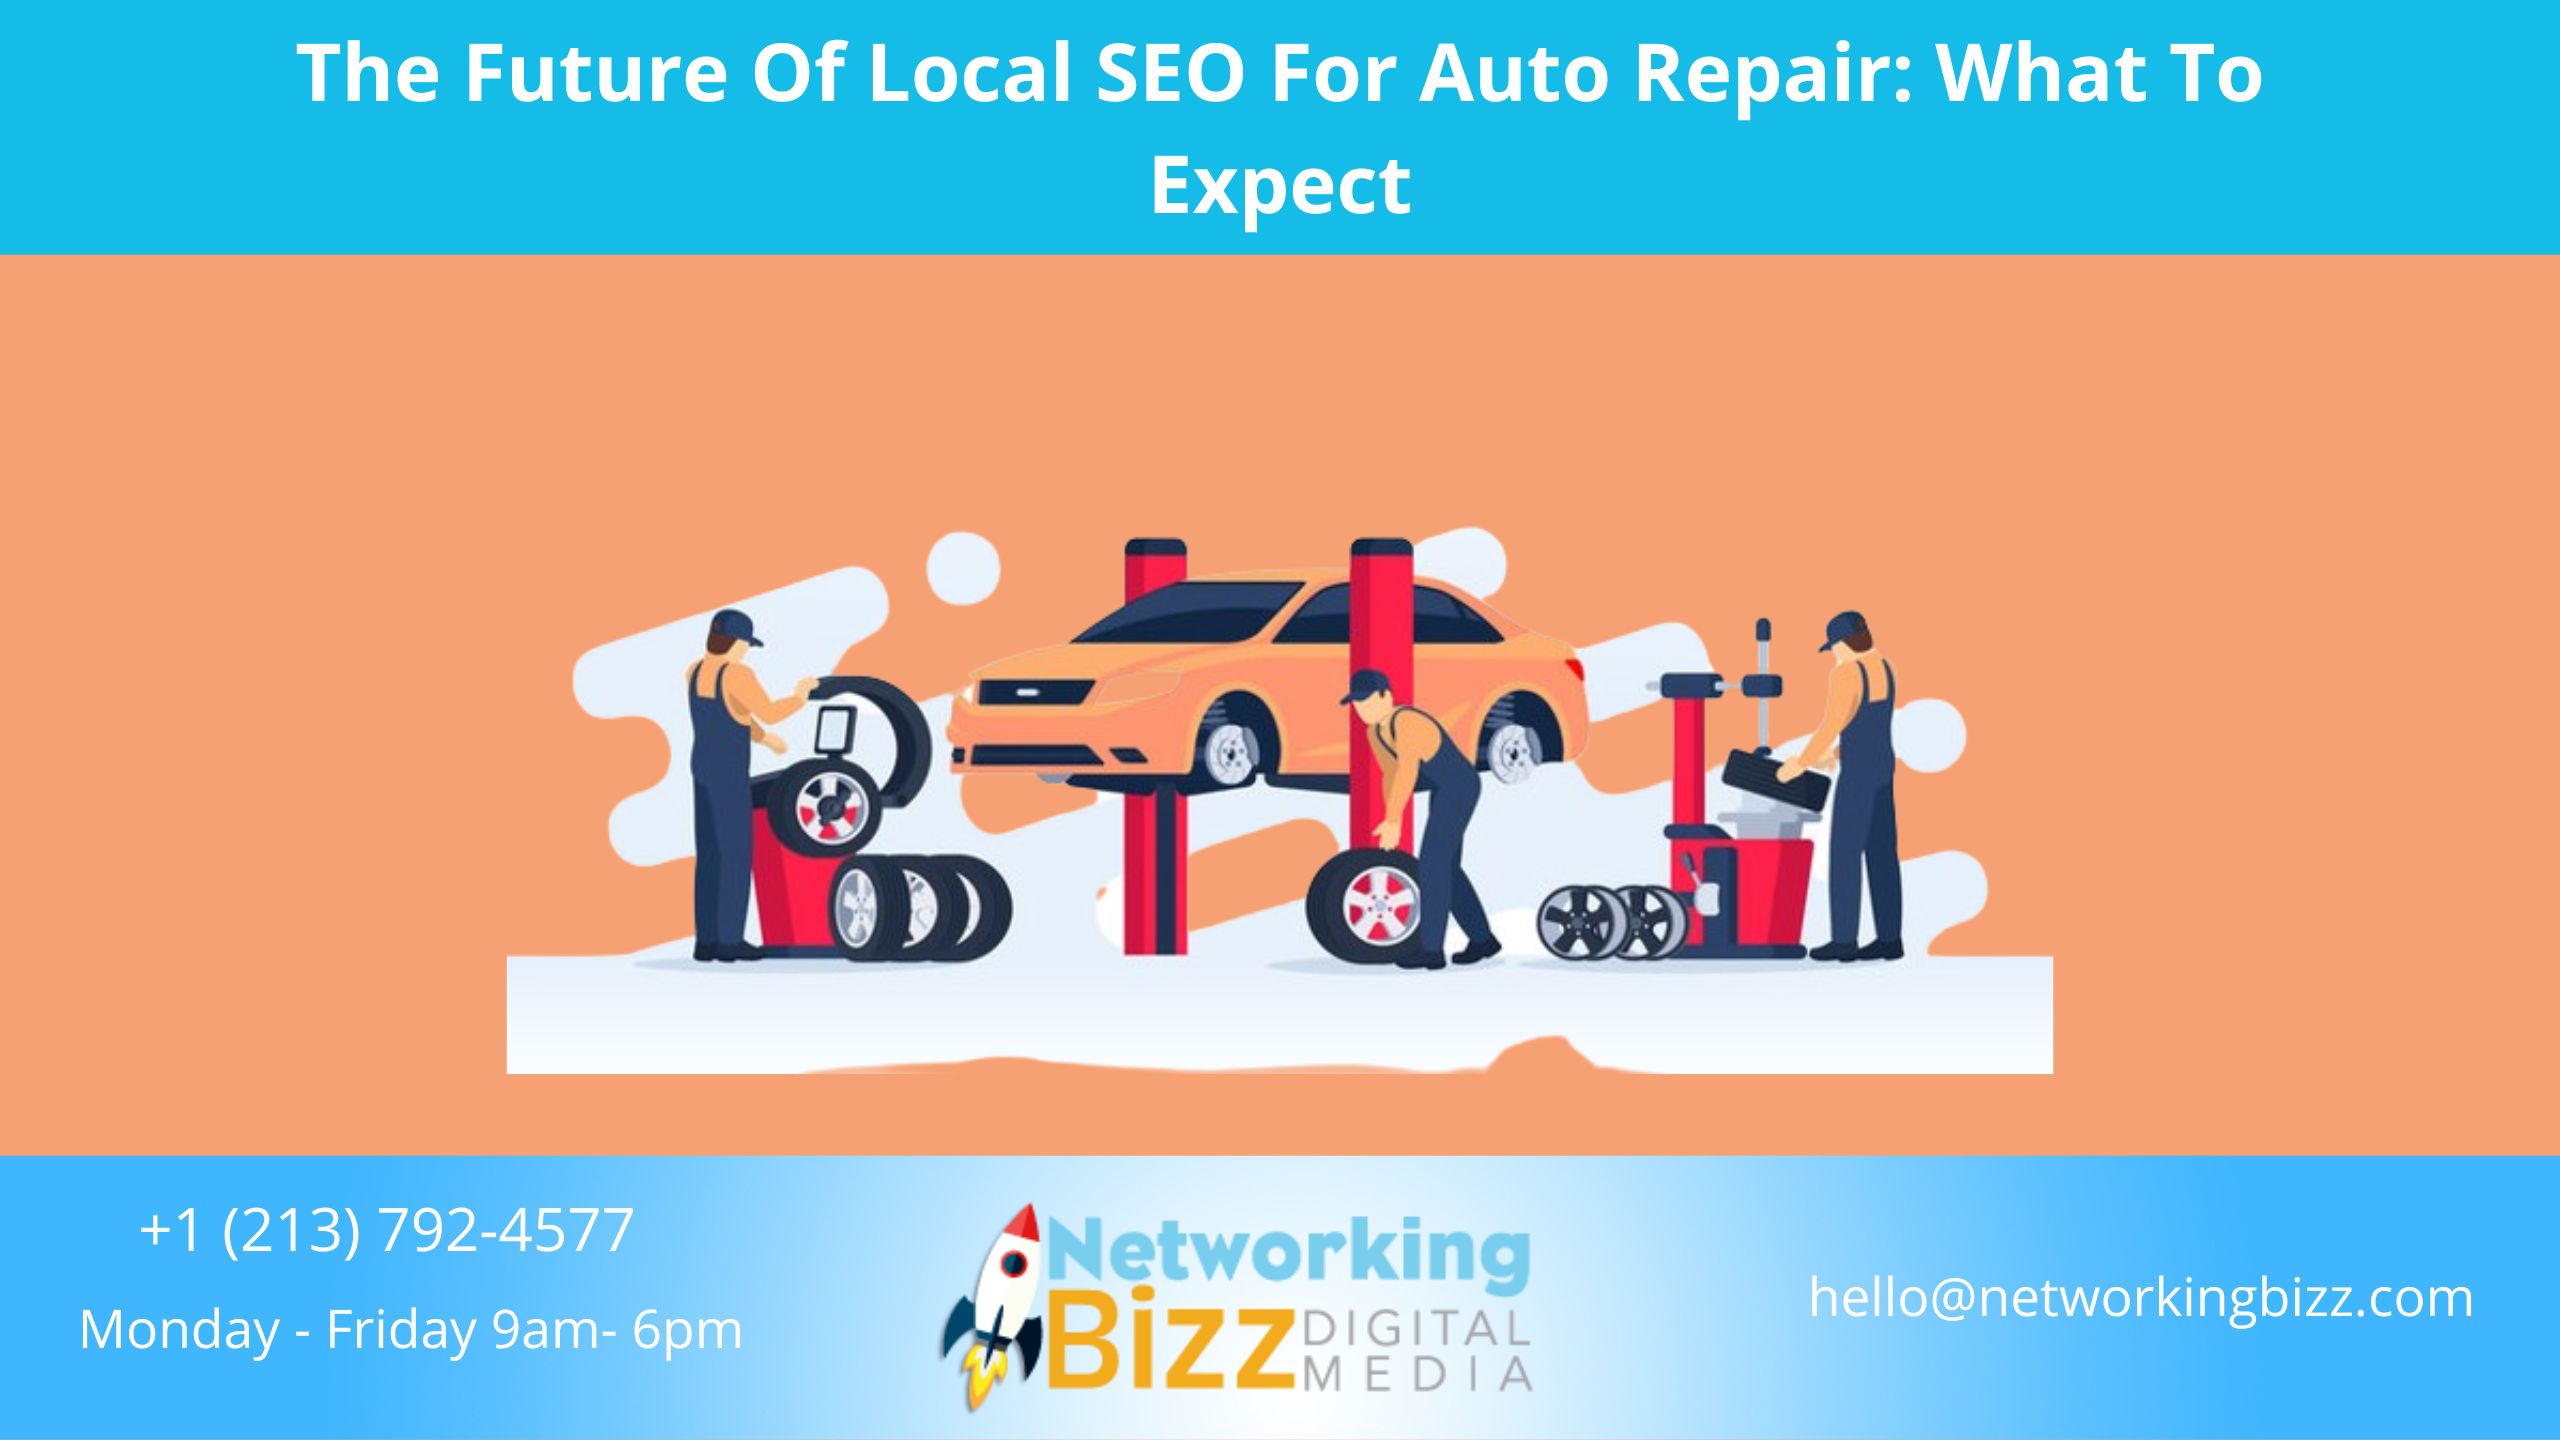 The Future Of Local SEO For Auto Repair: What To Expect